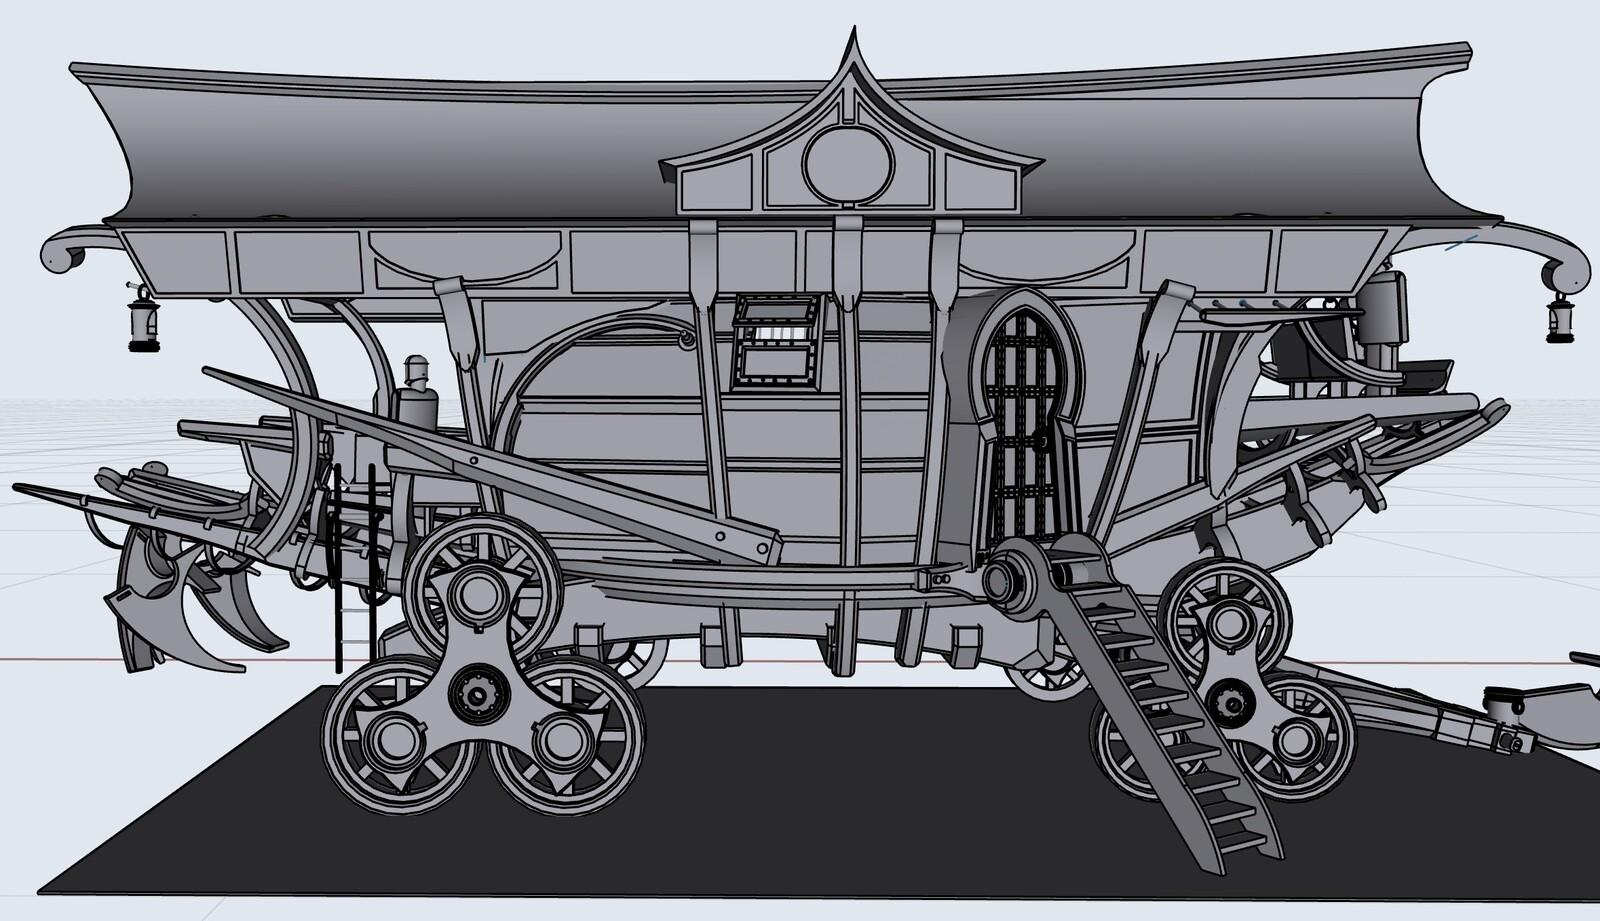 Profile showing steps up to main door into wagon. And wheels with chocks removed to show rough terrain mode.